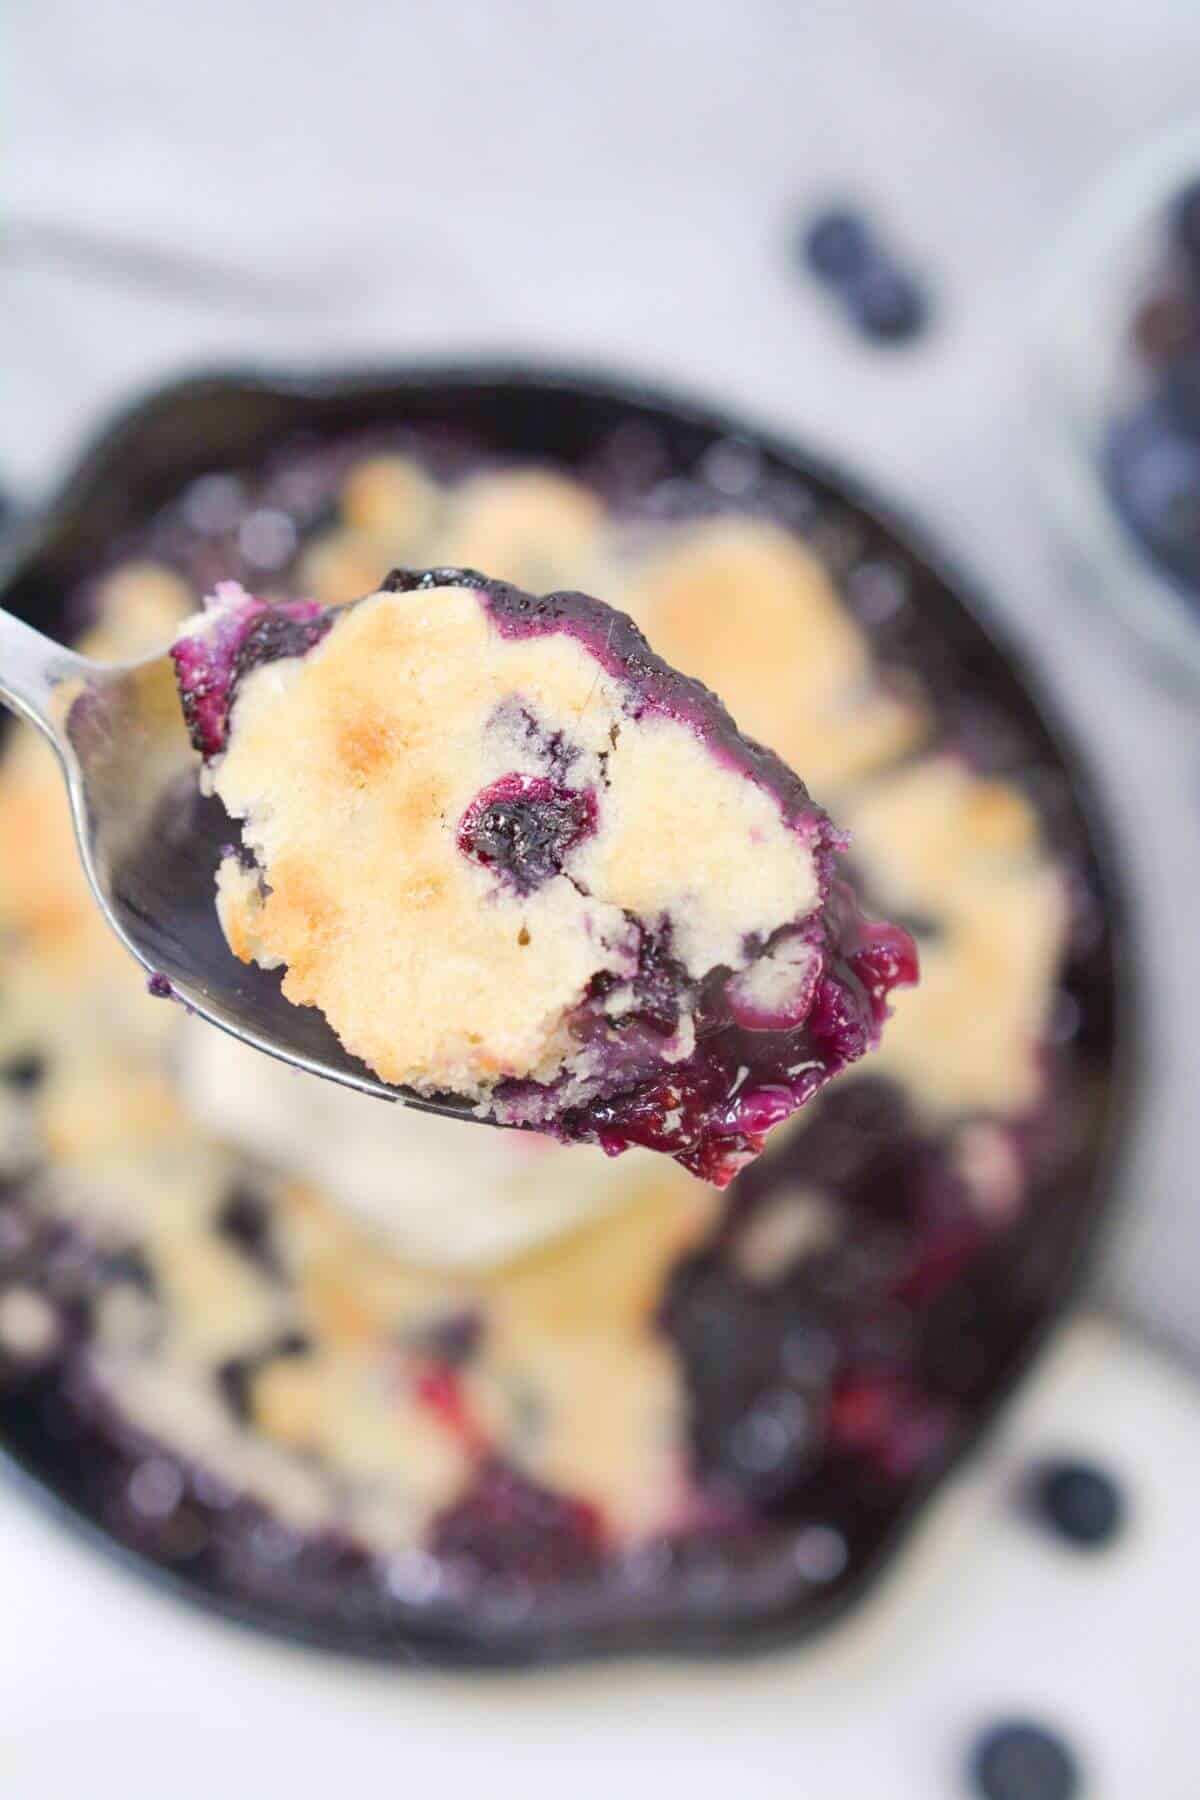 Spoon of cobbler over cobbler with ice cream.